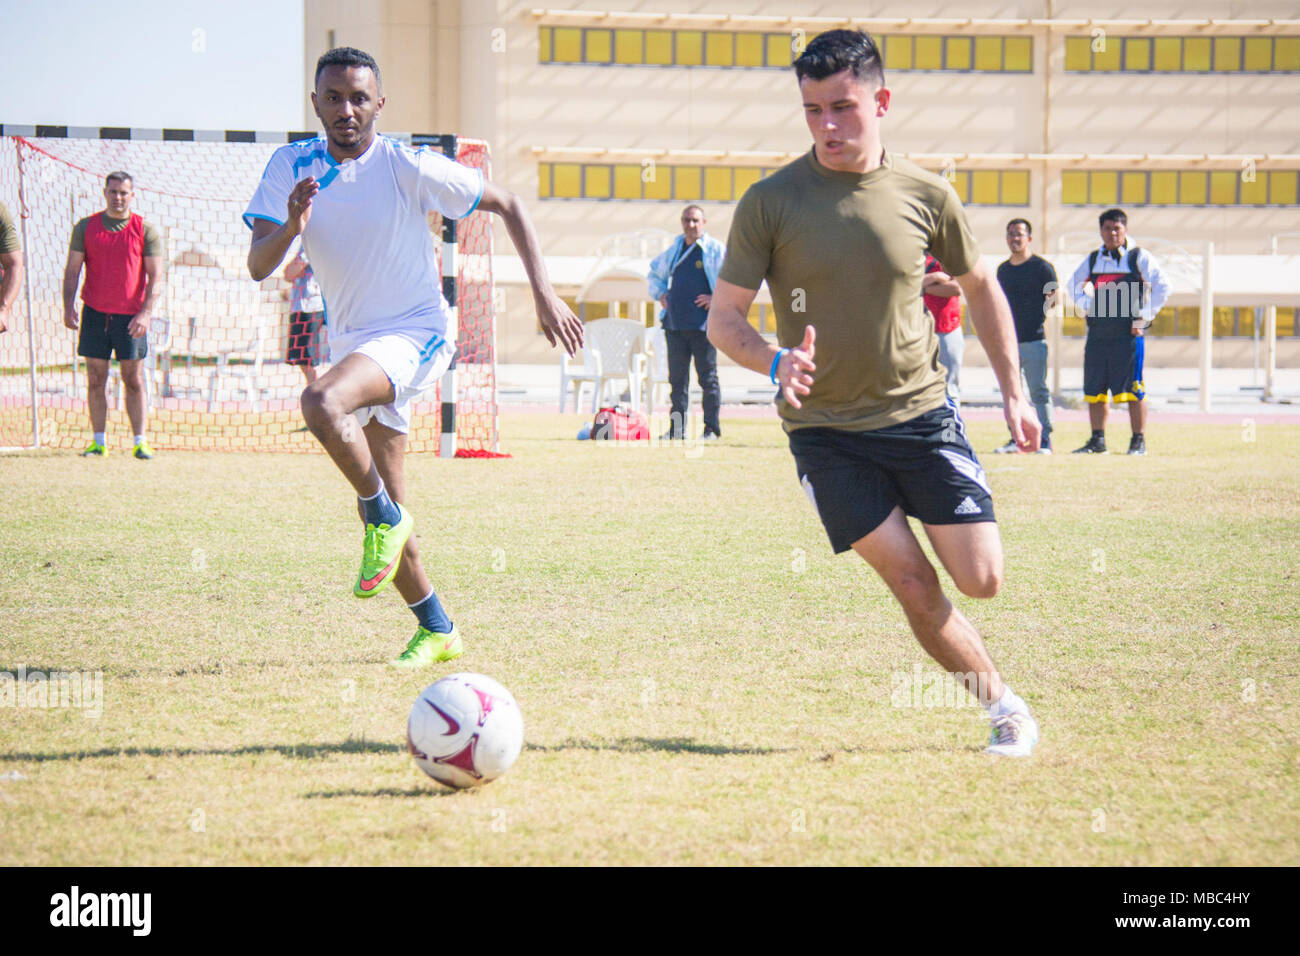 U.S. coalition partners play soccer during Qatar National Sports Day at Al Udeid Air Base, Qatar, Feb. 13, 2018. Competitors participated in several events throughout the day such as volleyball, soccer, basketball and track. The holiday began in 2011 after Emir Sheikh Tamim bin Hamad Al Thani instituted the holiday to promote a healthy and active lifestyle. (U.S. Air National Guard Stock Photo